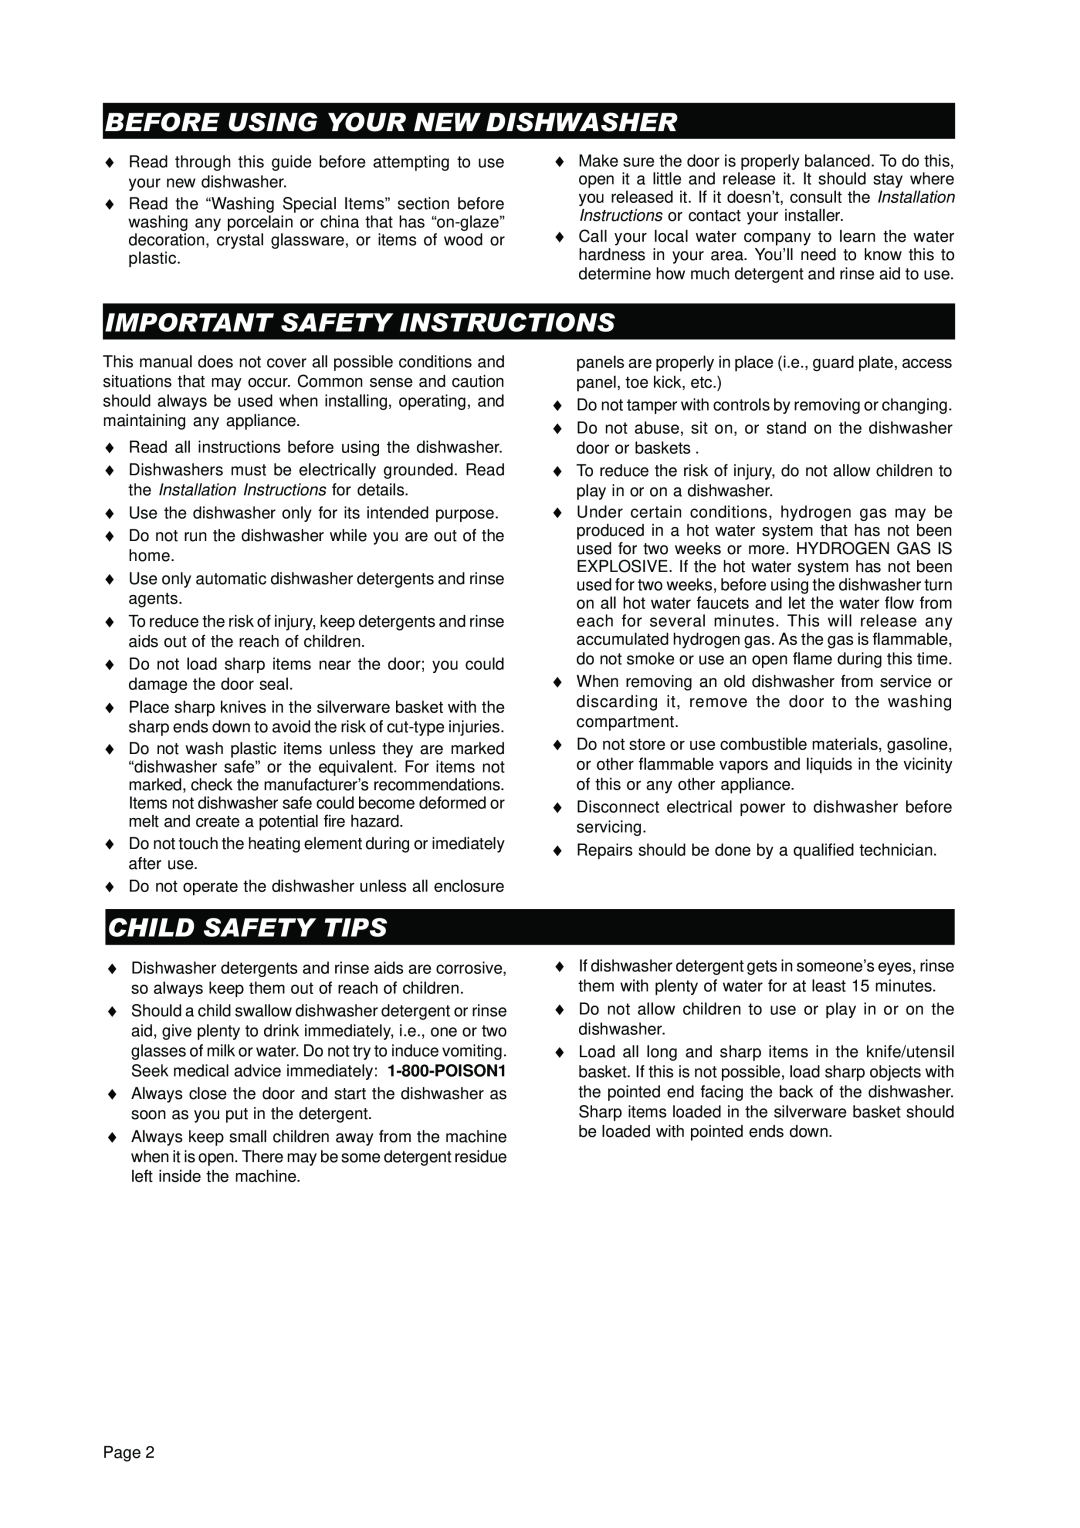 Asko D3530 important safety instructions Before Using Your New Dishwasher, Important Safety Instructions, Child Safety Tips 